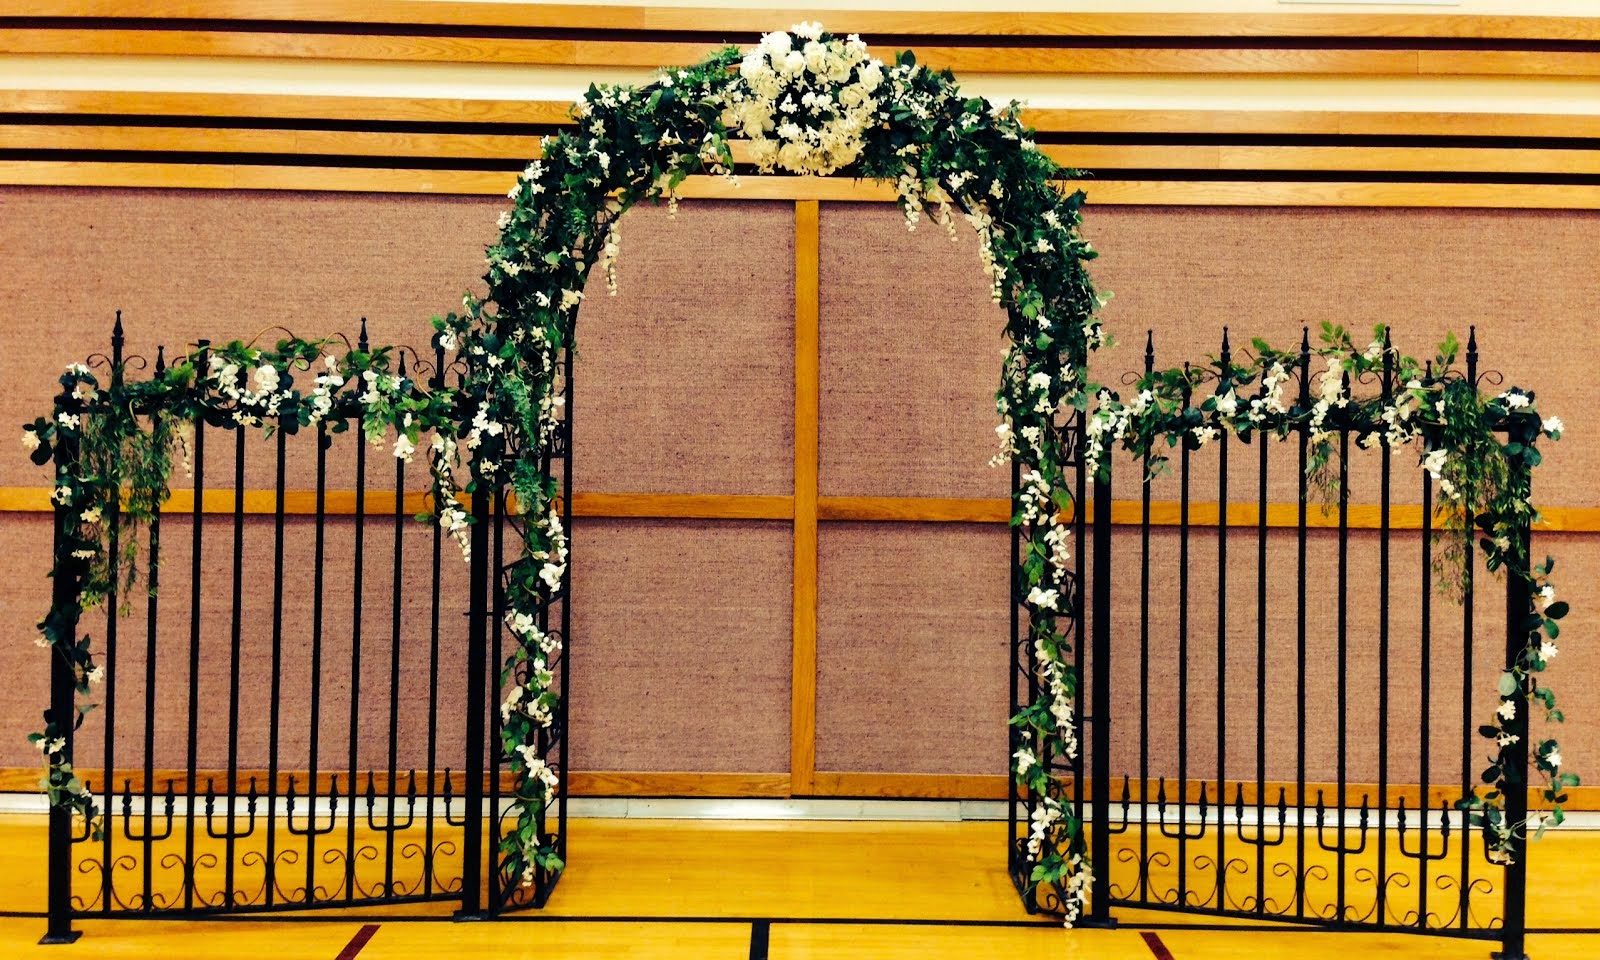 9' H x 14' W backdrop available to rent!  Comes with white flowers & greenery, lighting optional